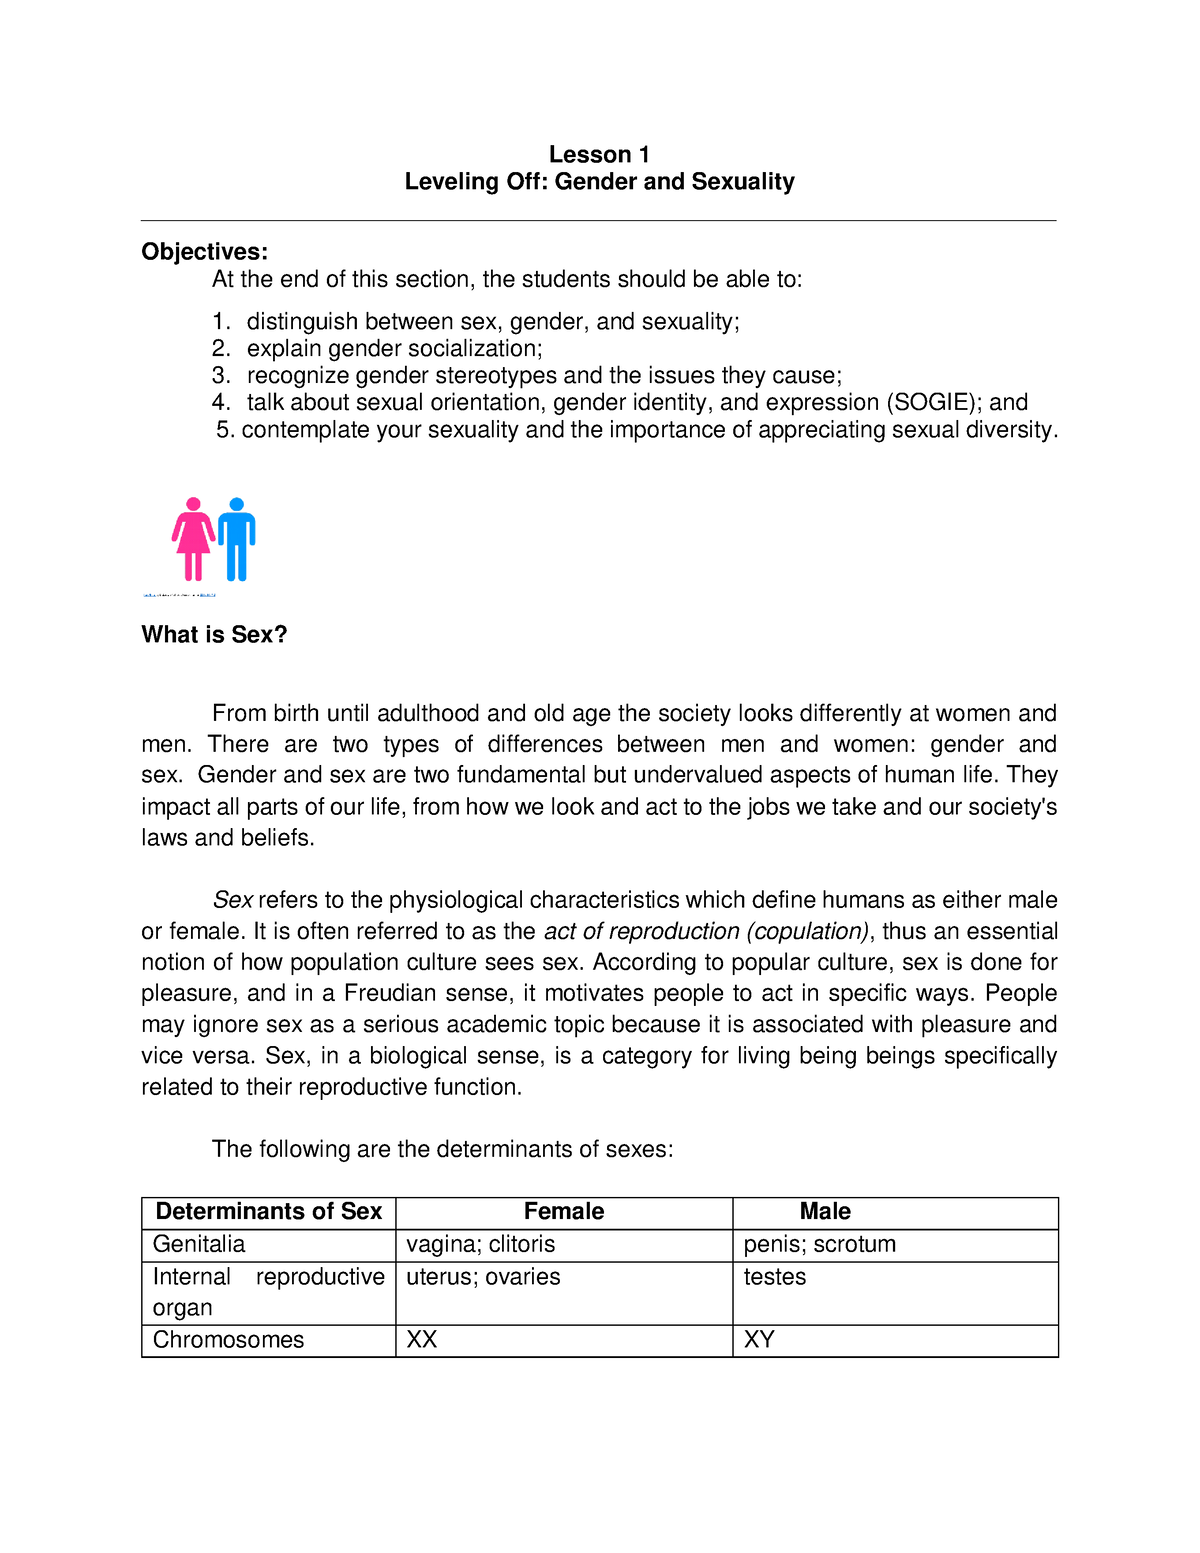 Gender And Society Lesson 1 Lesson 1 Leveling Off Gender And Sexuality Objectives At The End 2750